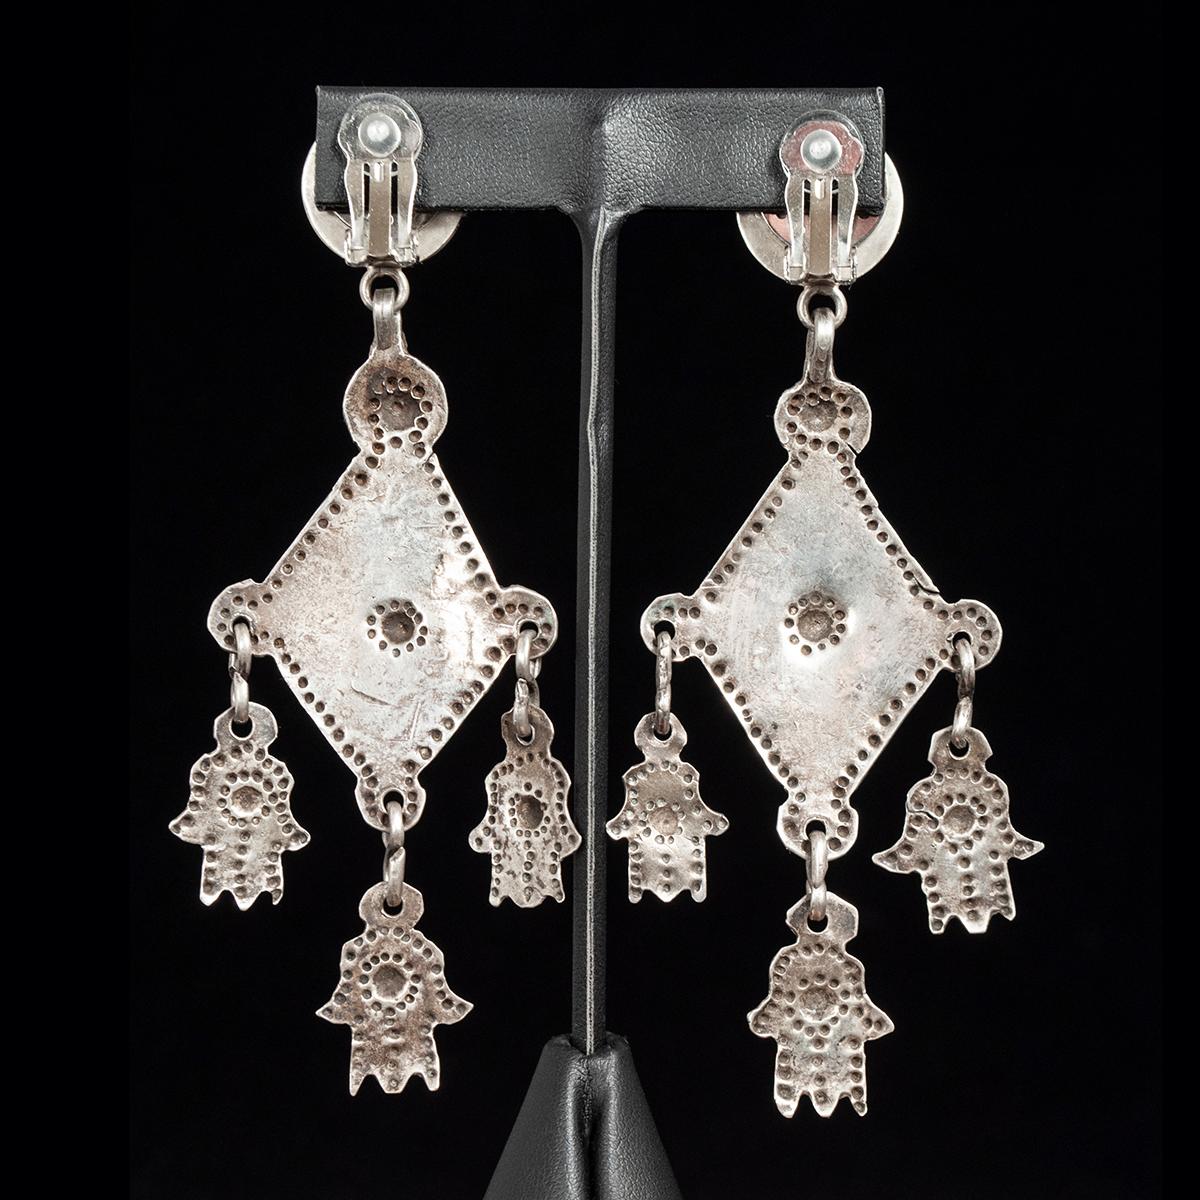 Tribal Mid-20th Century Silver Khamsa and Copper Earrings by Jewels For Sale